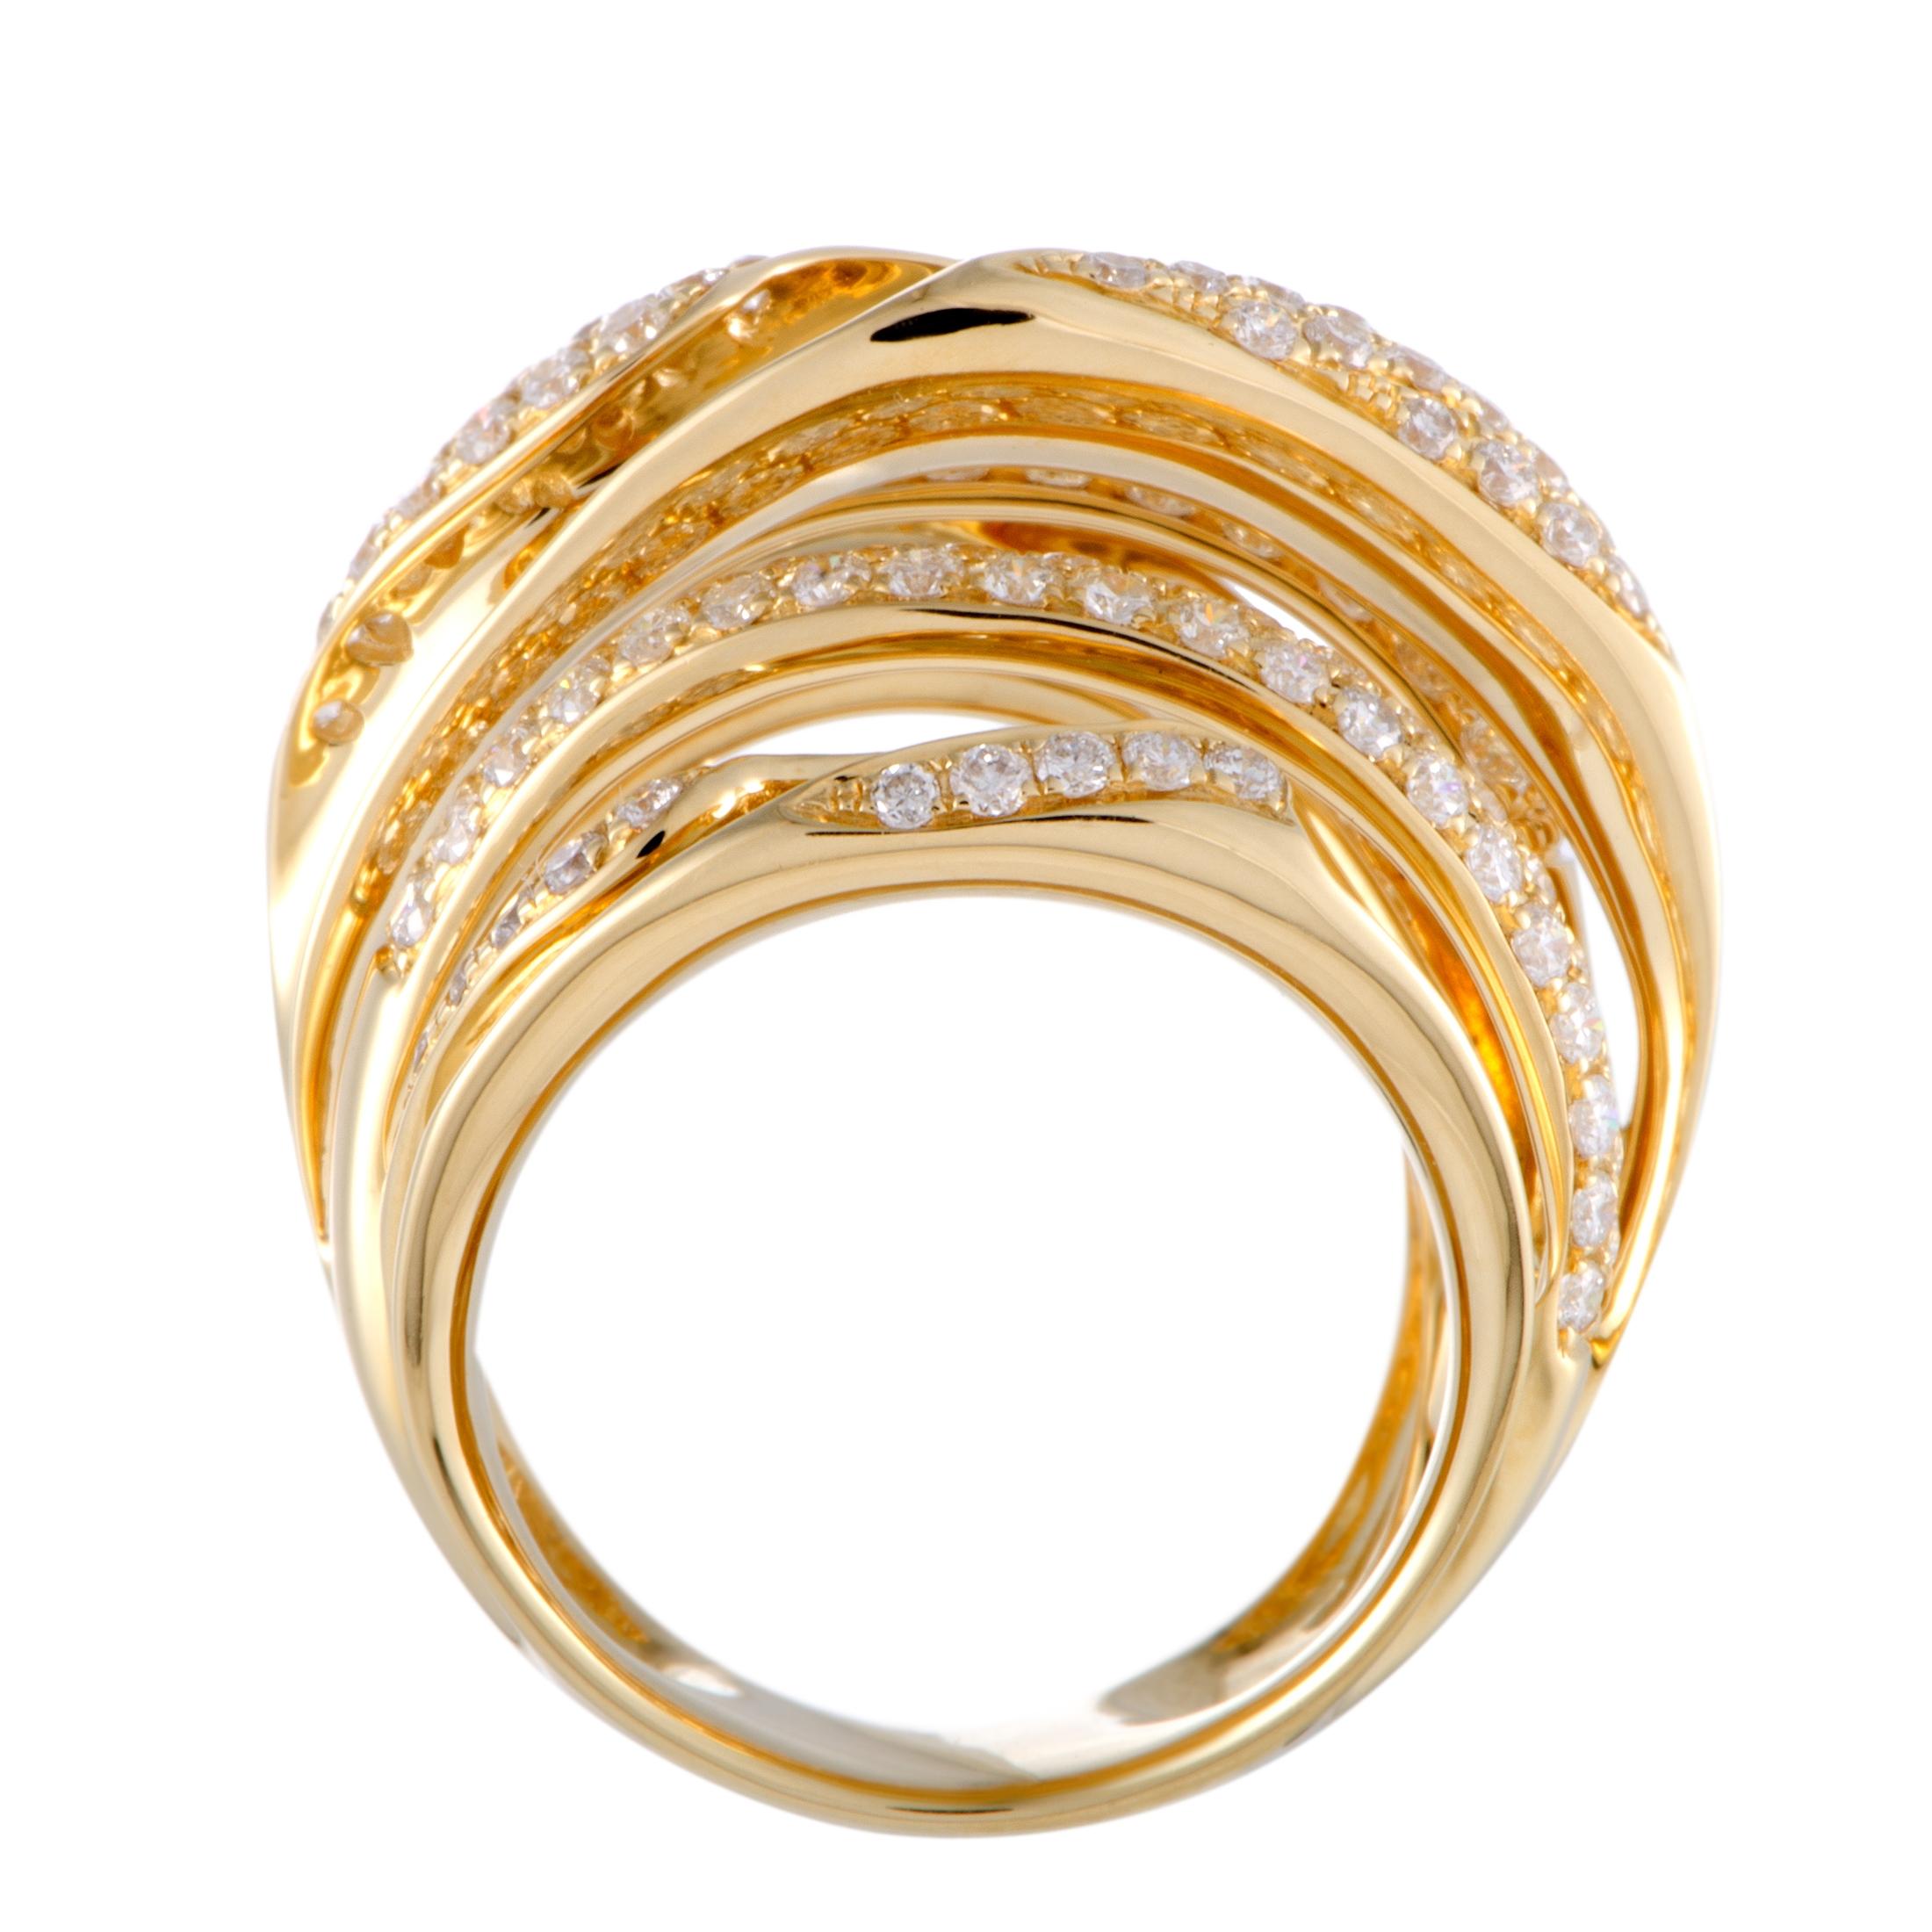 The luxurious sheen of yellow gold and the lustrous resplendence of diamond stones are beautifully combined in this fabulous ring into creating an incredibly extravagant effect. Splendidly designed by , this attractive ring is exquisitely crafted